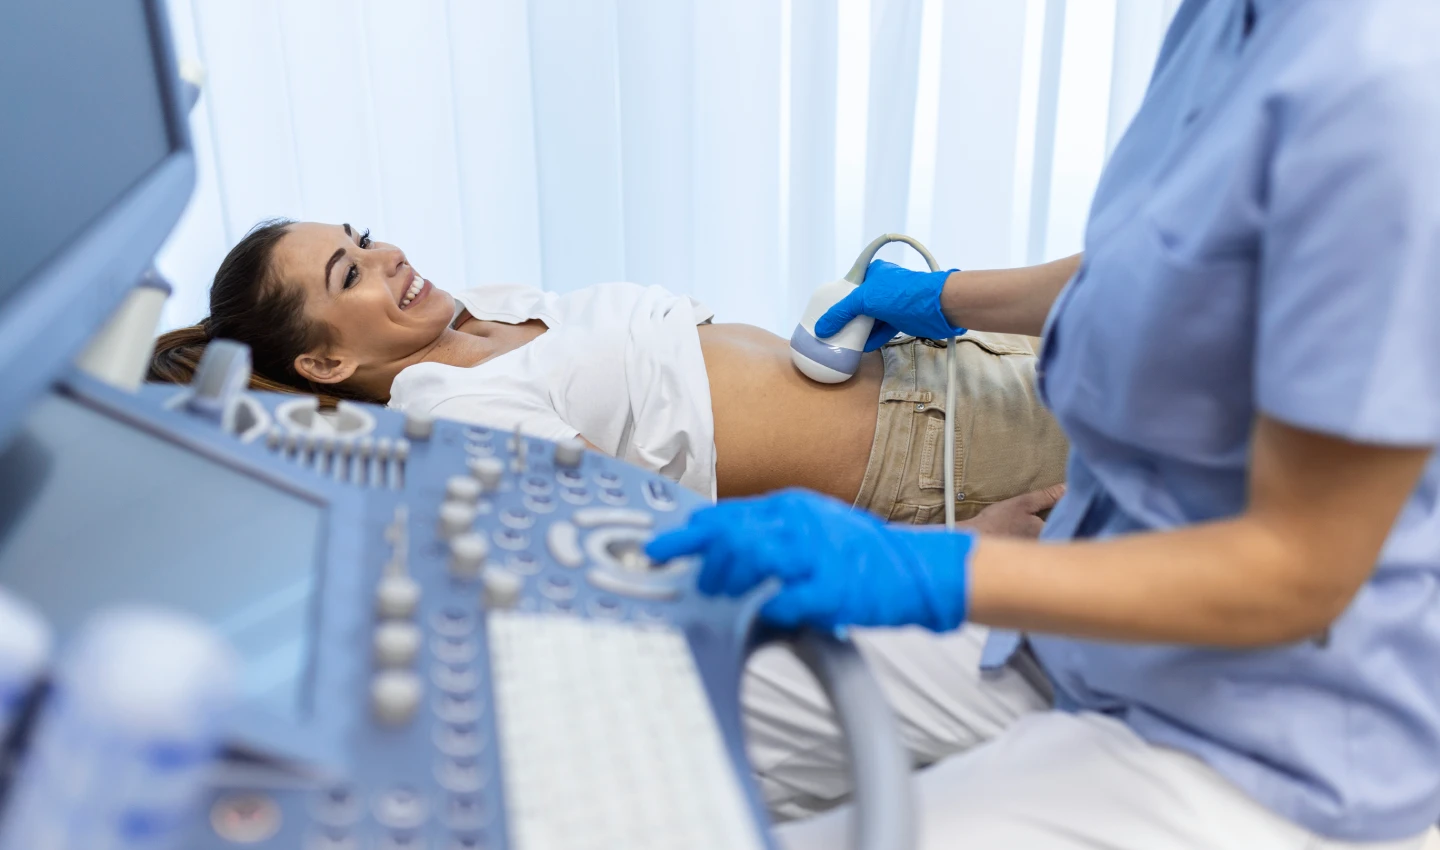 A doctor uses ultrasound therapy on a patient's abdomen to reduce fat and reshape their body, as discussed in the article "From CoolSculpting to Ultrasound Therapy: Which Non-Surgical Body Treatments Are Right for You?